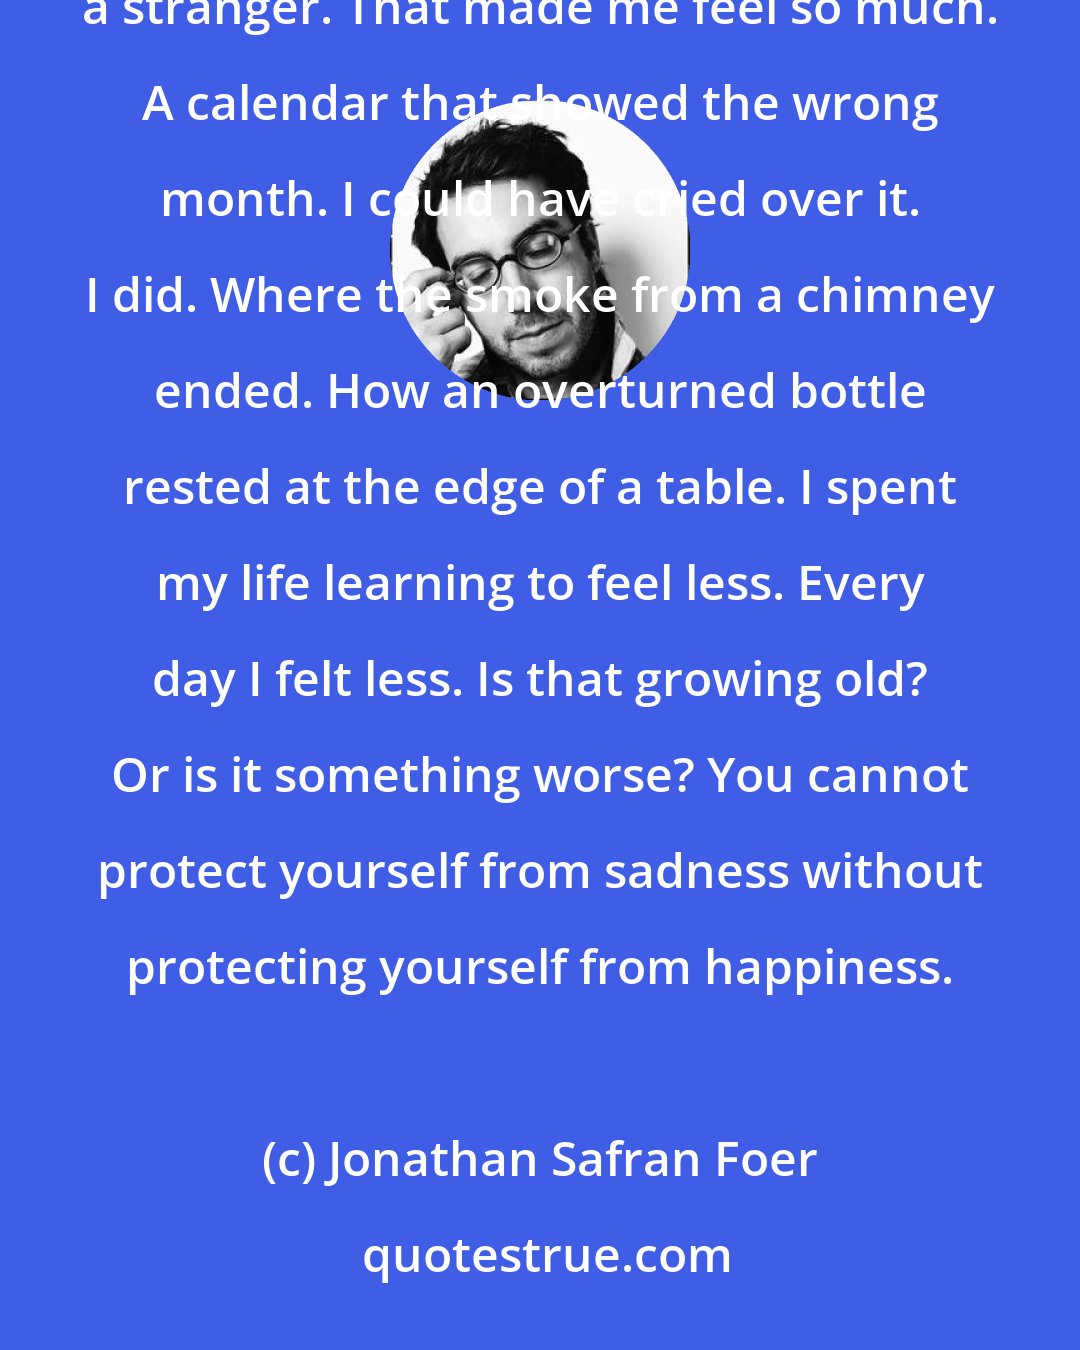 Jonathan Safran Foer: When I was a girl, my life was music that was always getting louder. Everything moved me. A dog following a stranger. That made me feel so much. A calendar that showed the wrong month. I could have cried over it. I did. Where the smoke from a chimney ended. How an overturned bottle rested at the edge of a table. I spent my life learning to feel less. Every day I felt less. Is that growing old? Or is it something worse? You cannot protect yourself from sadness without protecting yourself from happiness.